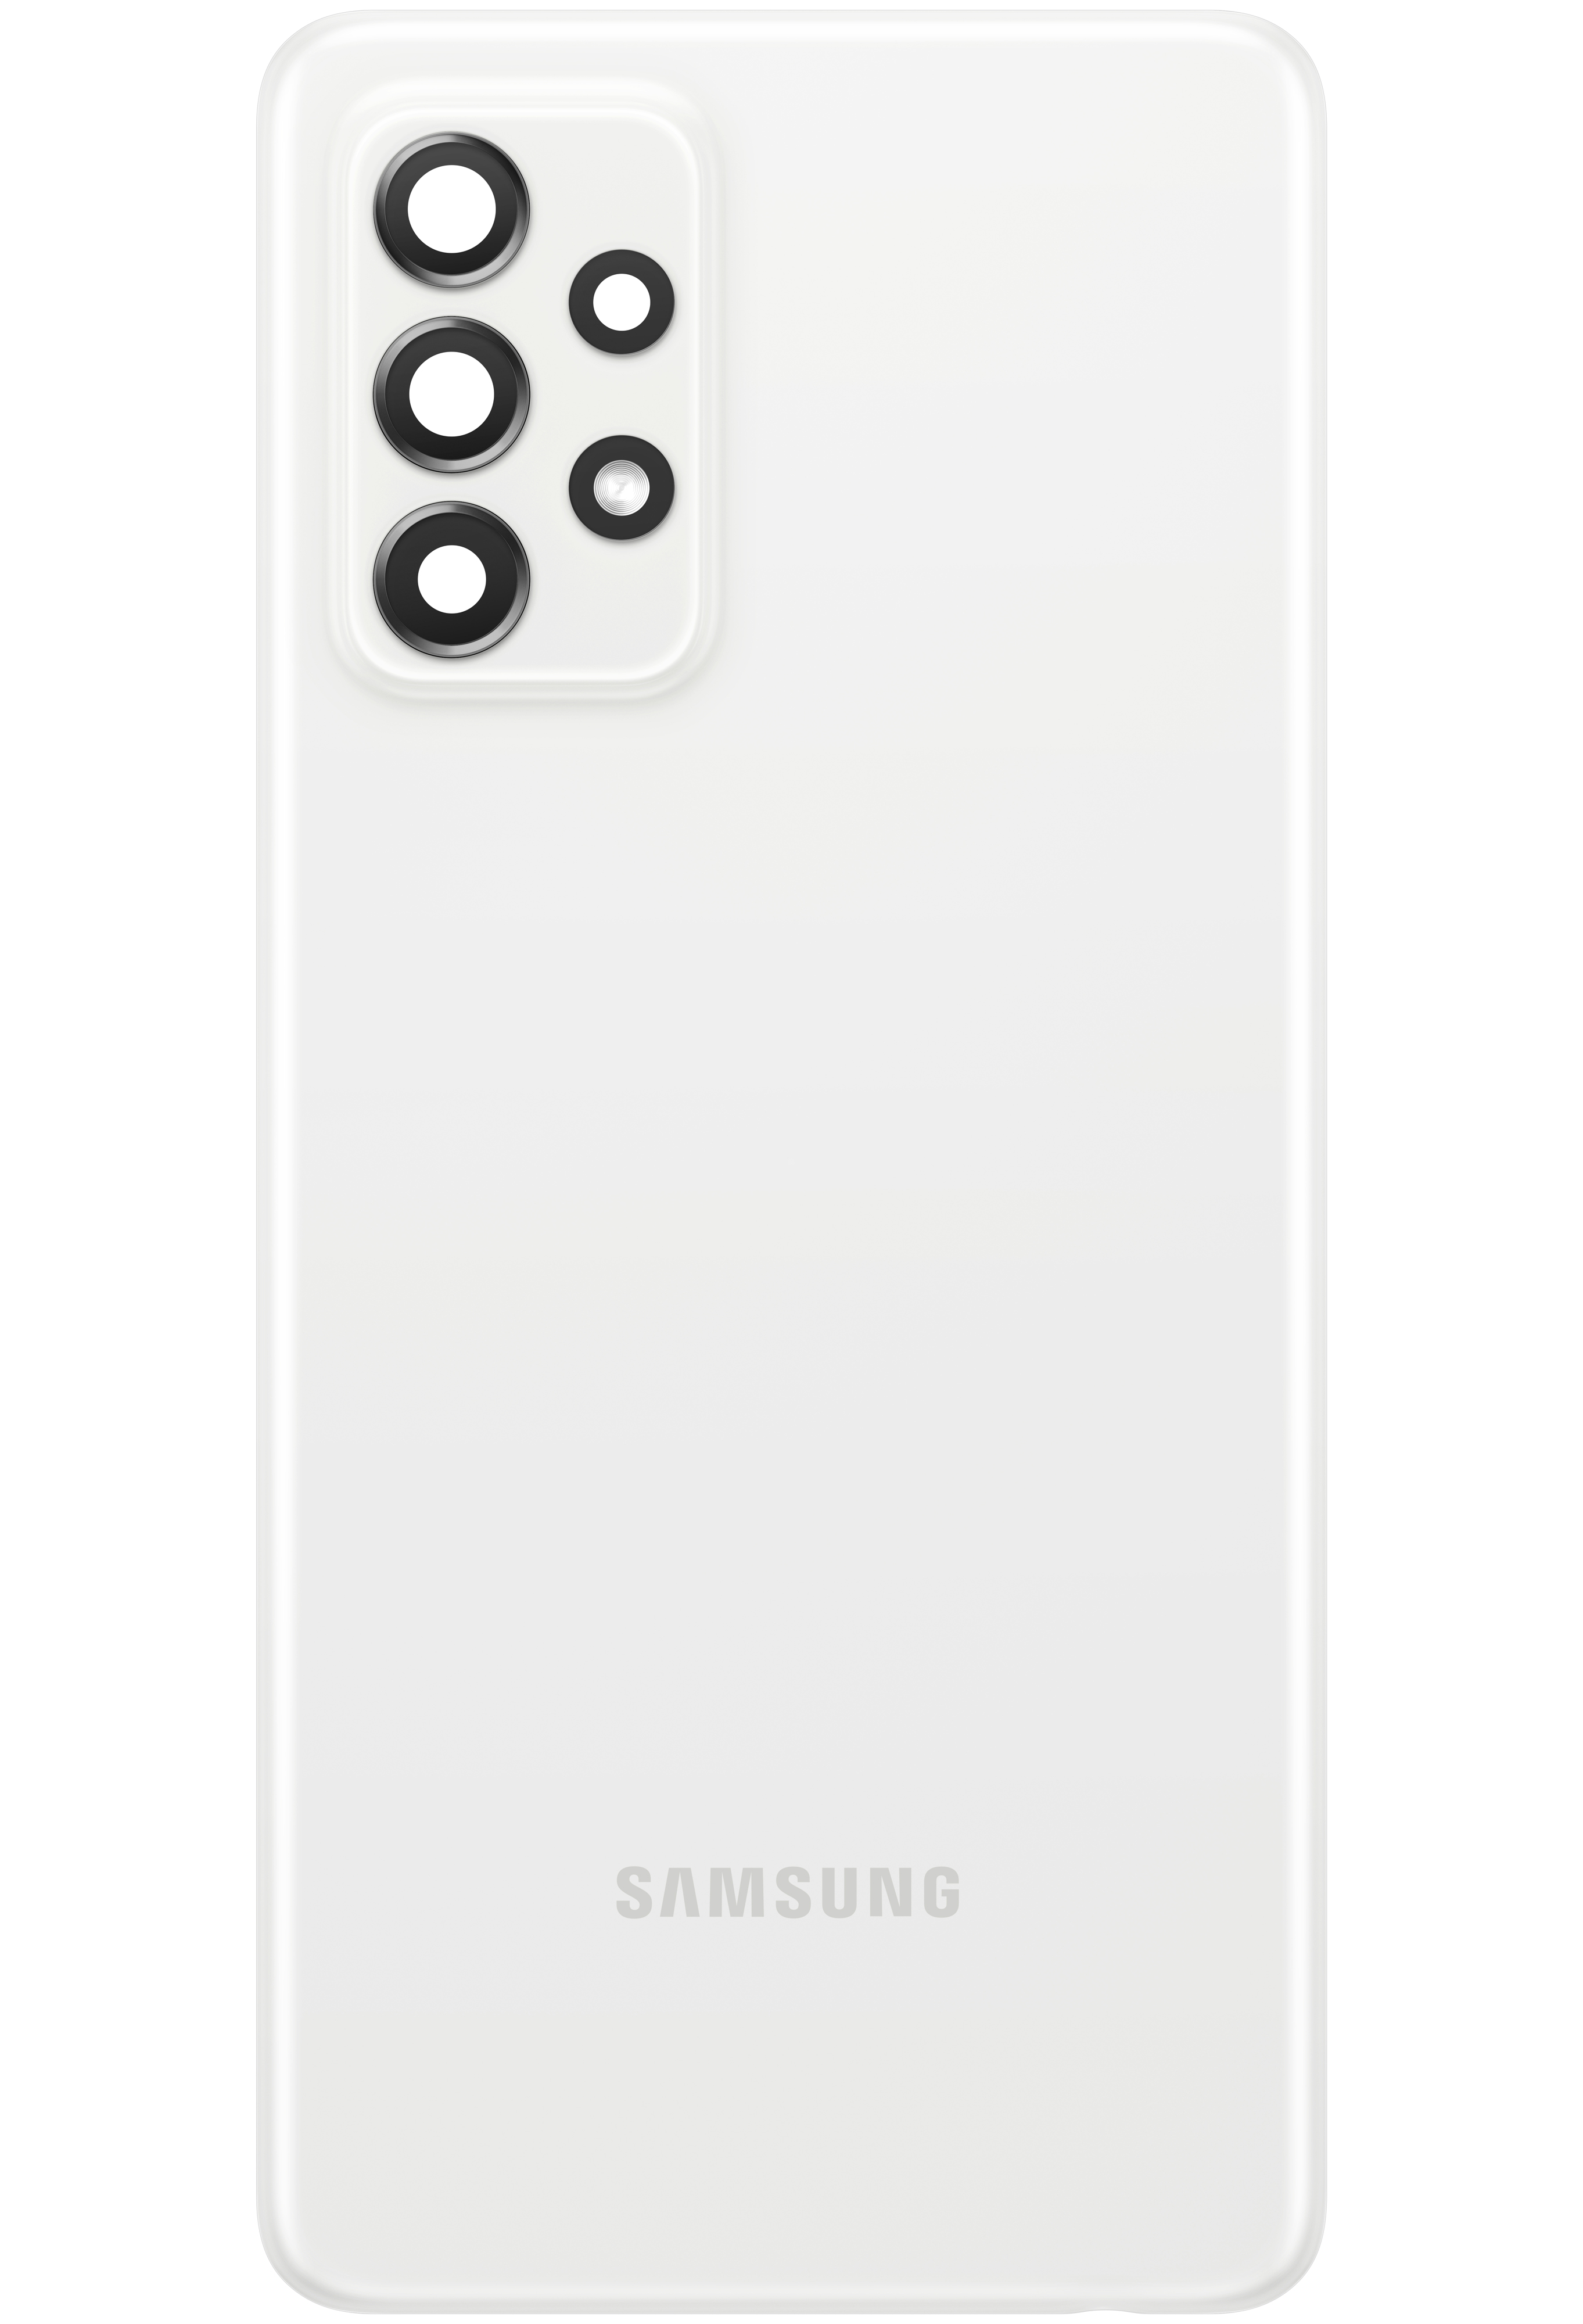 battery-cover-for-samsung-galaxy-a52-5g-a526-awesome-white-gh82-25225d